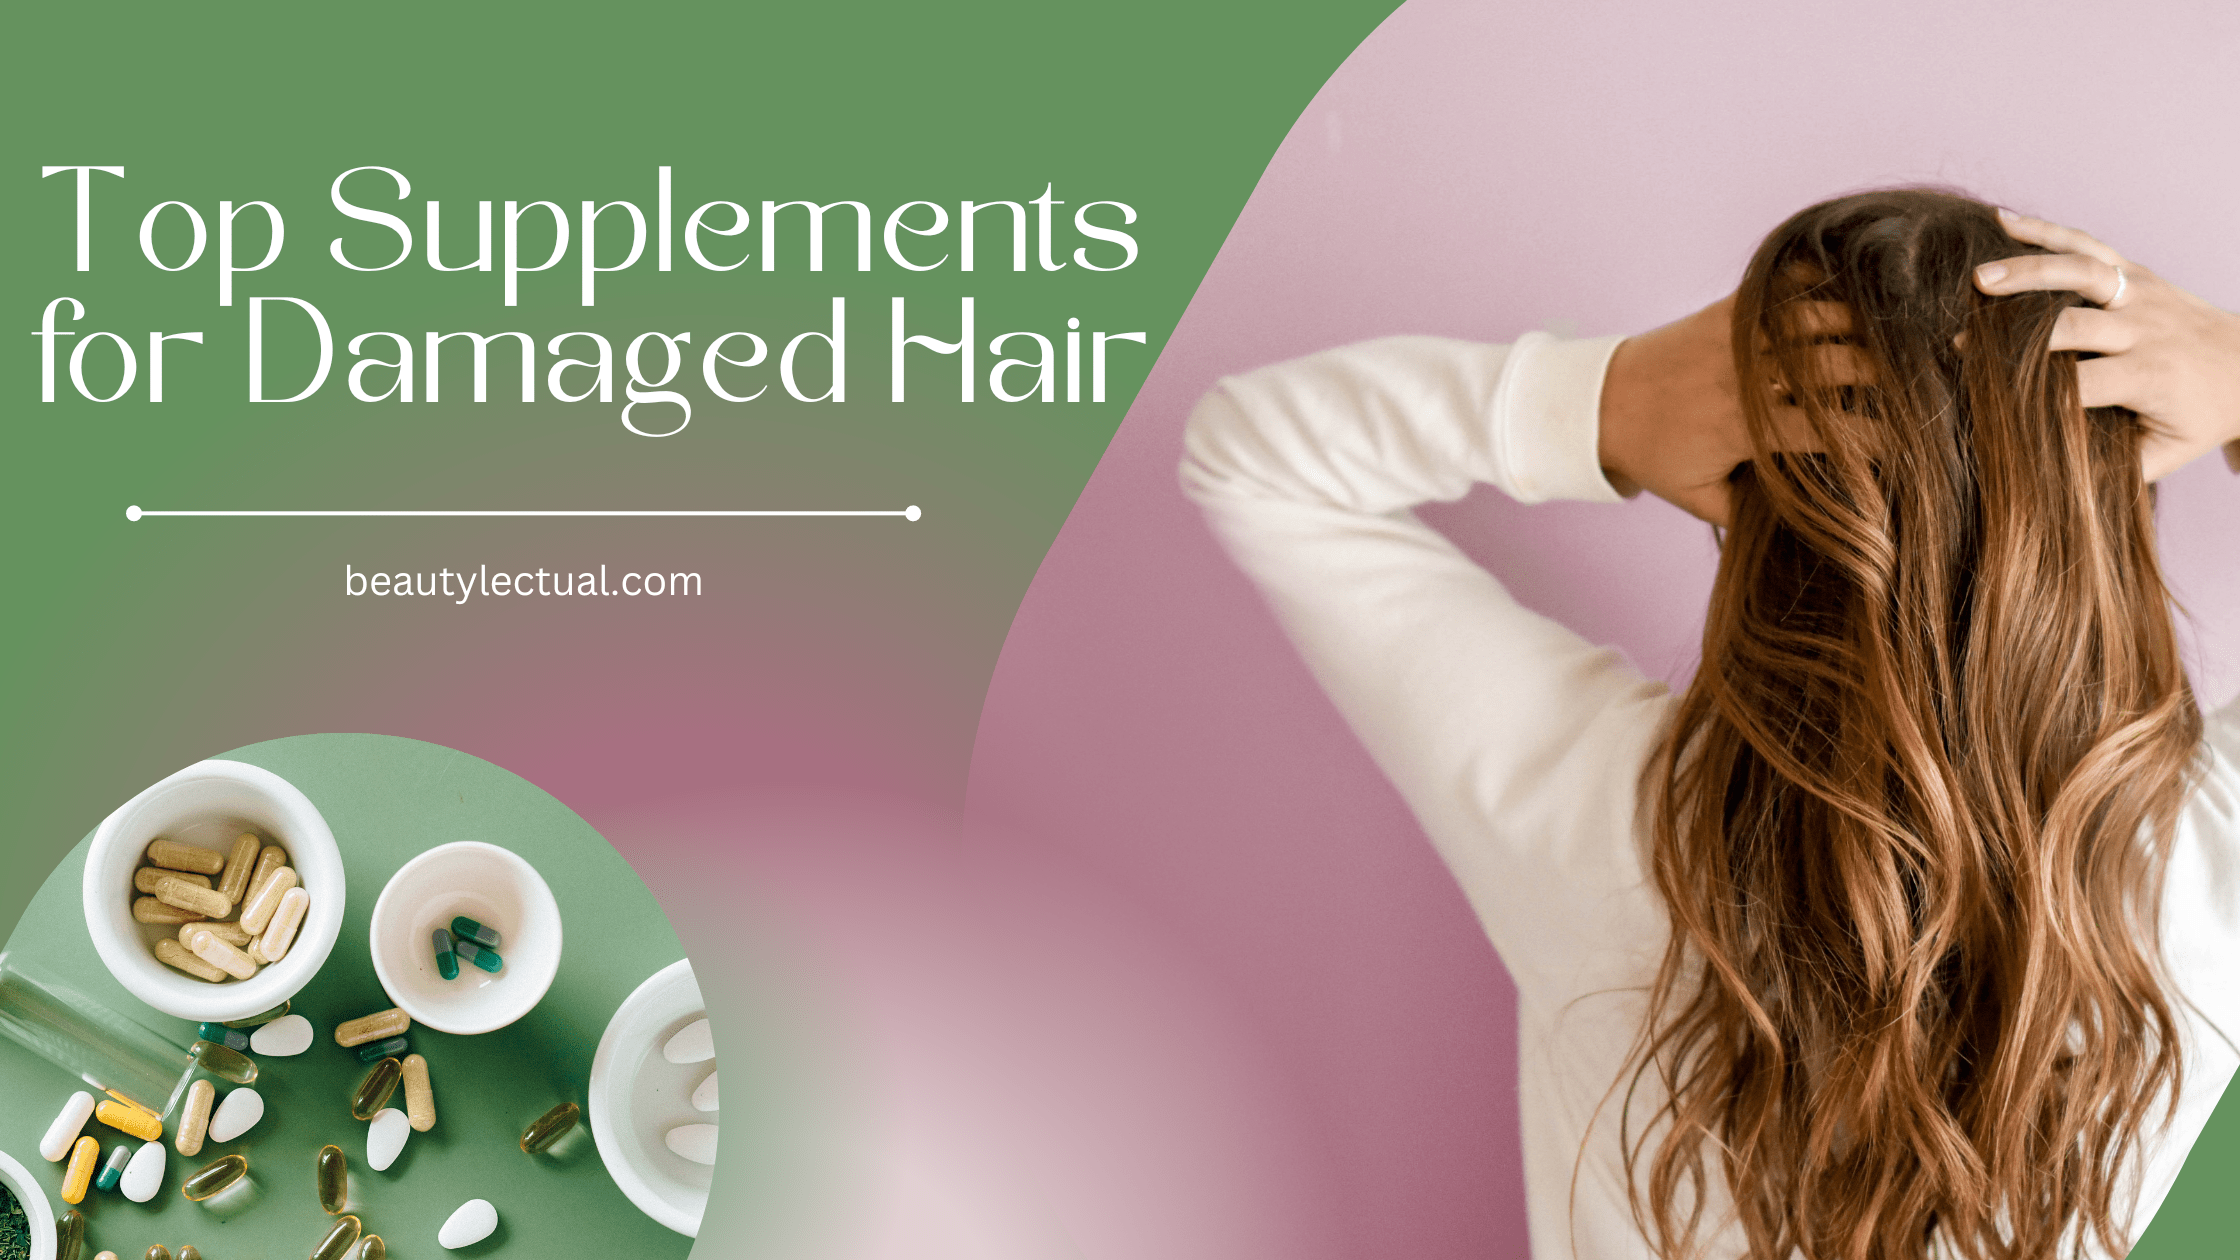 Hair Supplements for Damaged Hair